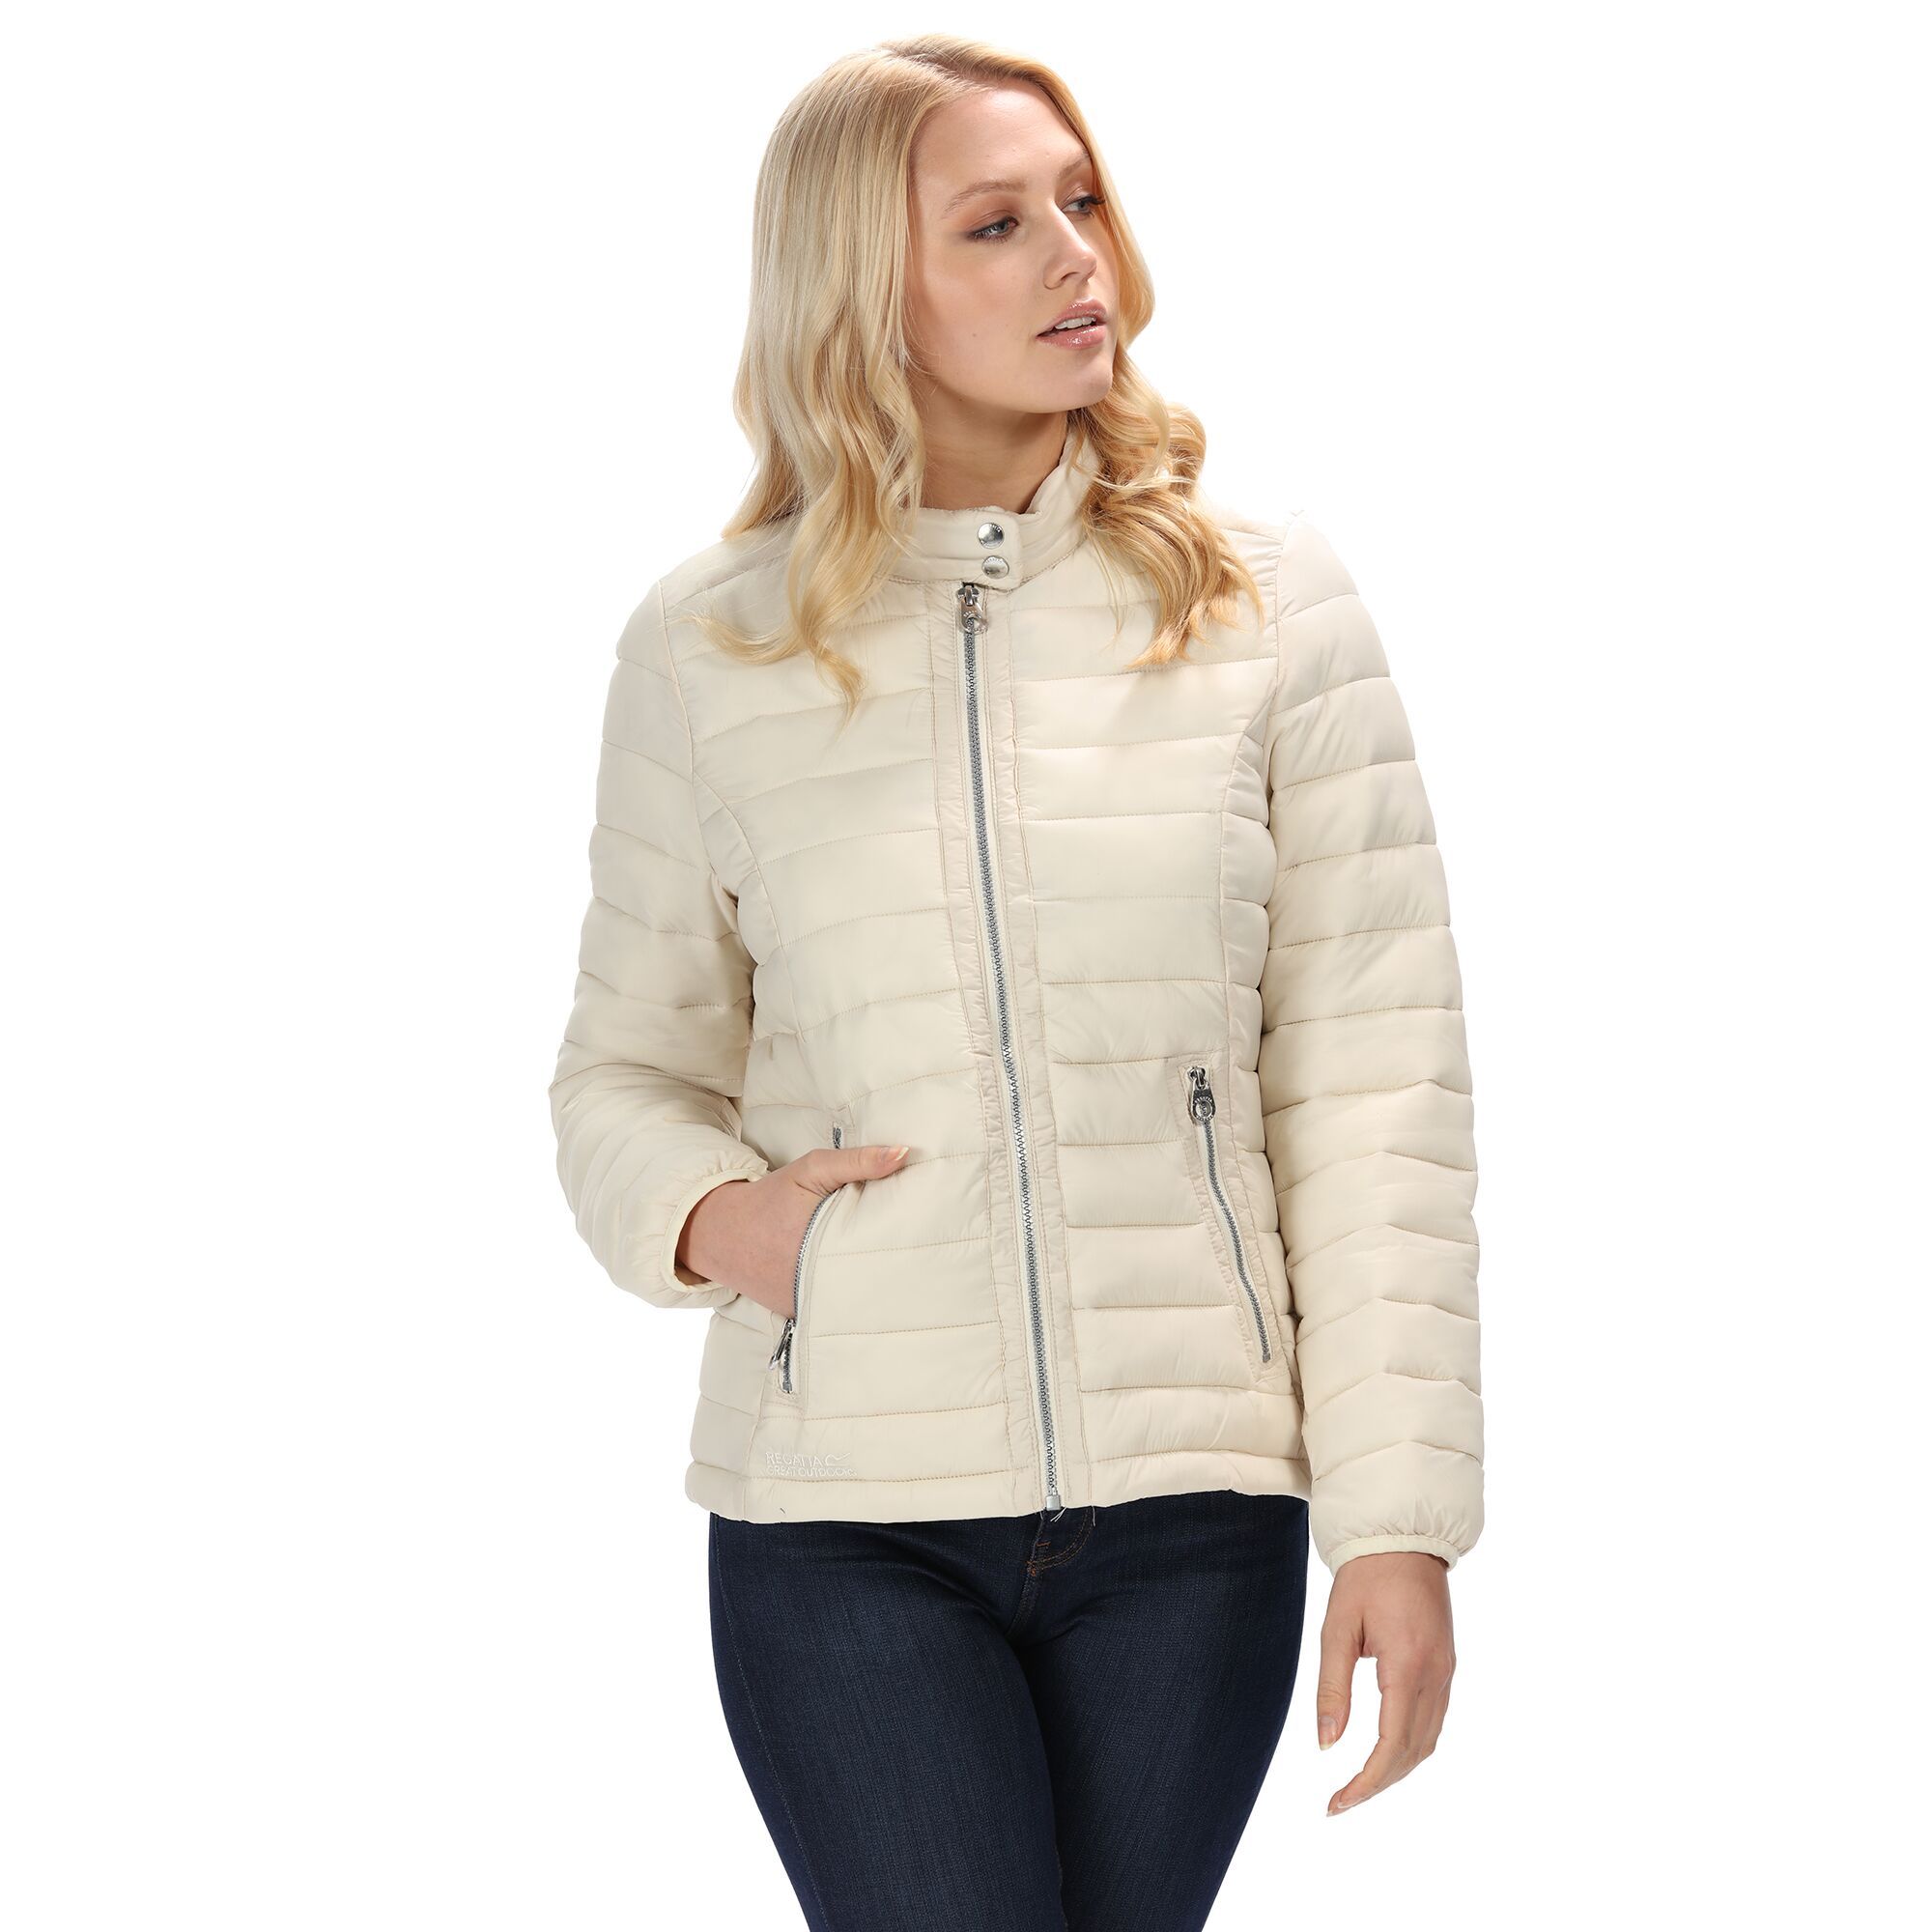 Womens full zip jacket with water repellent and care finish. Thermo-Guard insulation. Polyester taffeta lined. Fashion stand collar with branded snap fastening. 2 zipped lower warm lined pockets. Ideal for wearing outdoors on a cold day. 100% Polyamide.